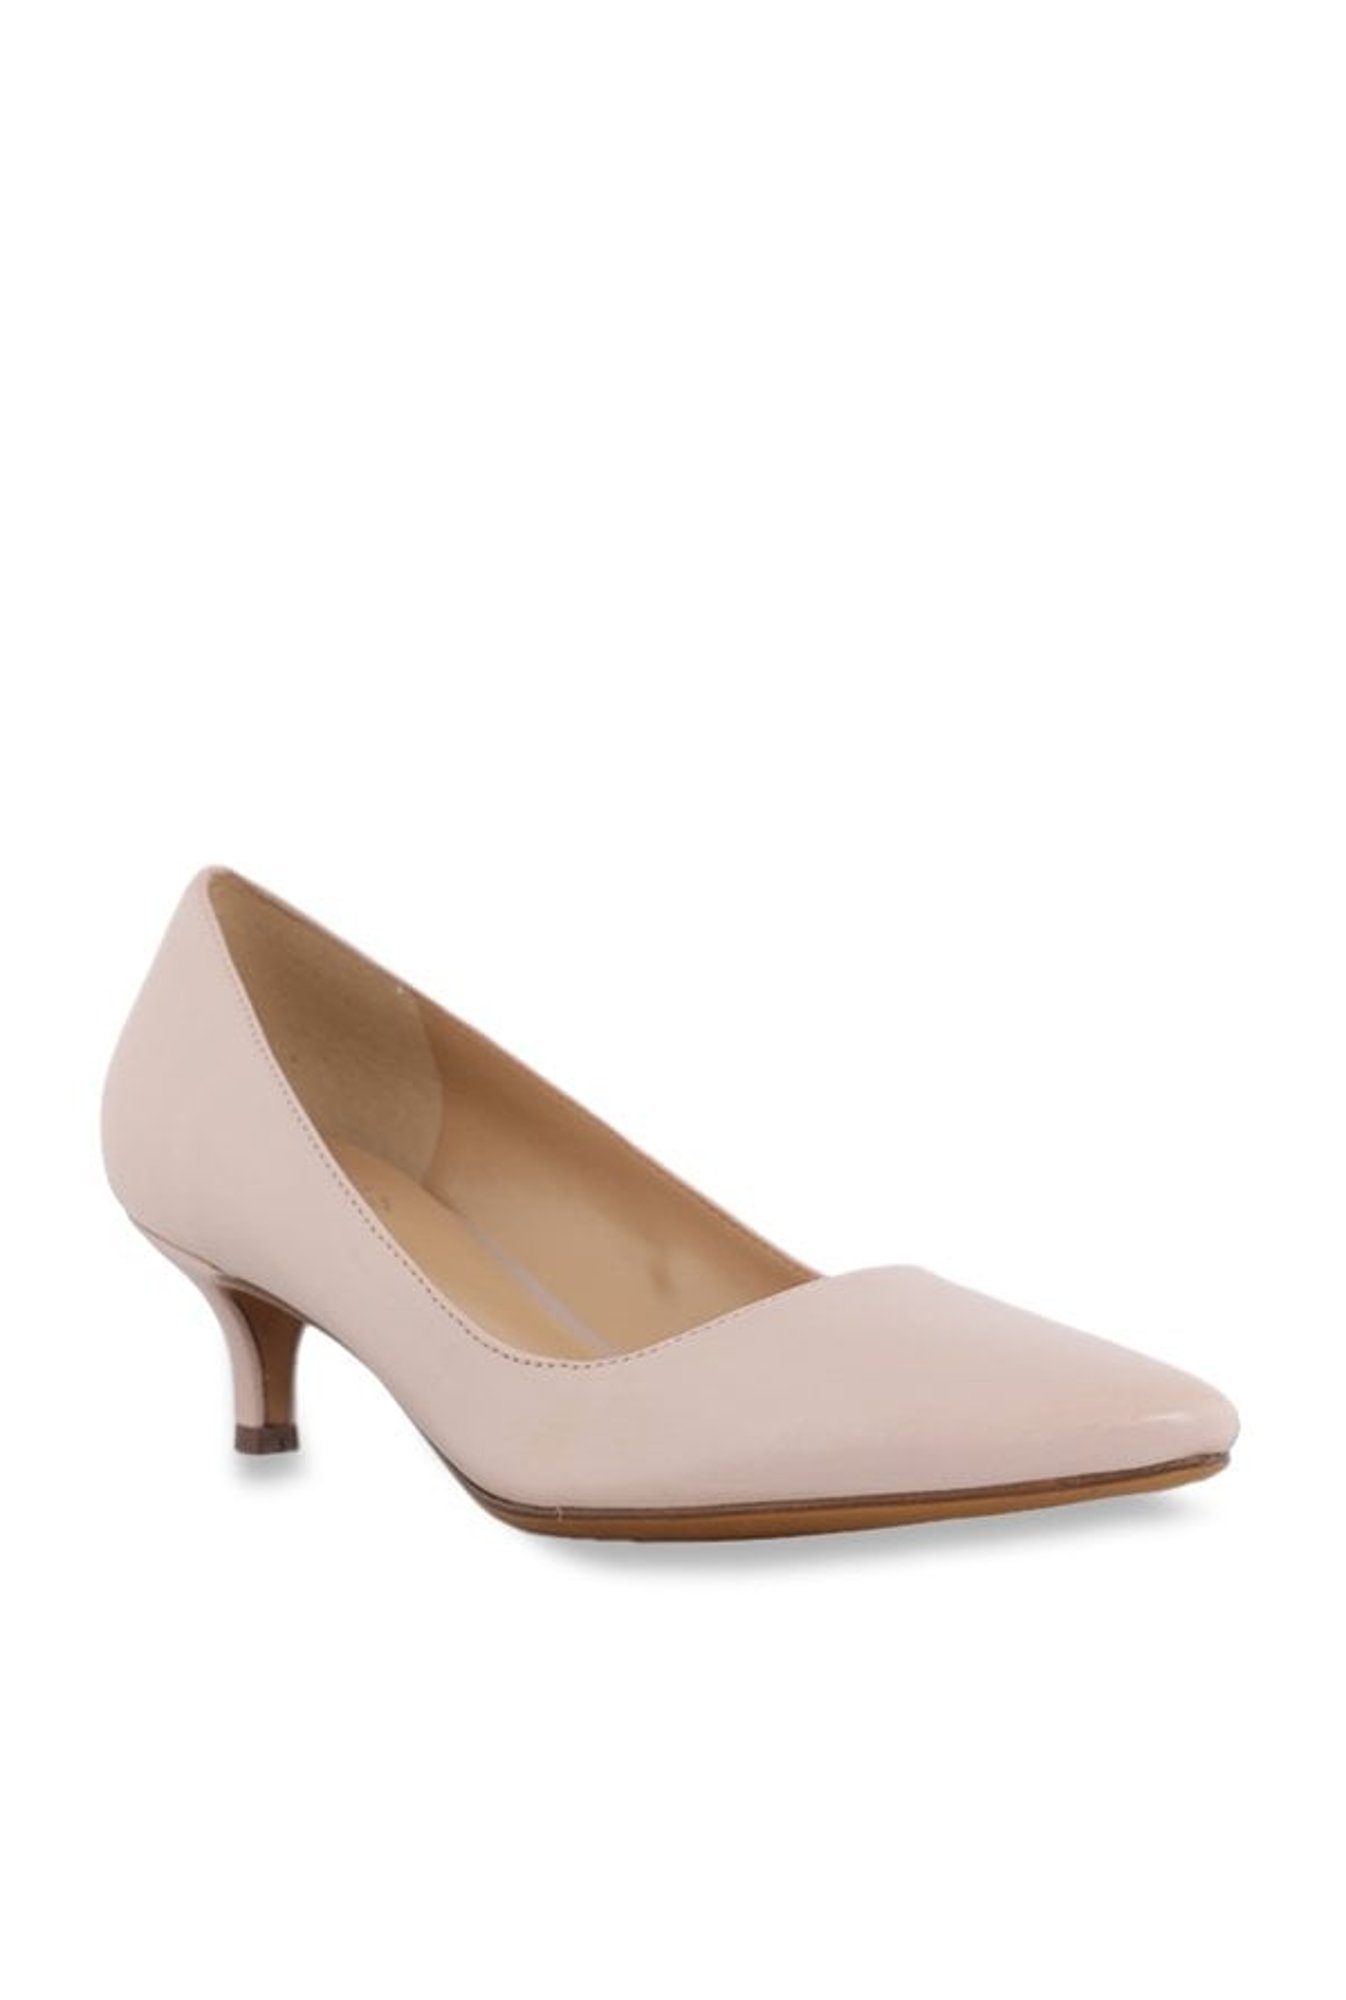 Naturalizer by Bata Nude Casual Pumps 